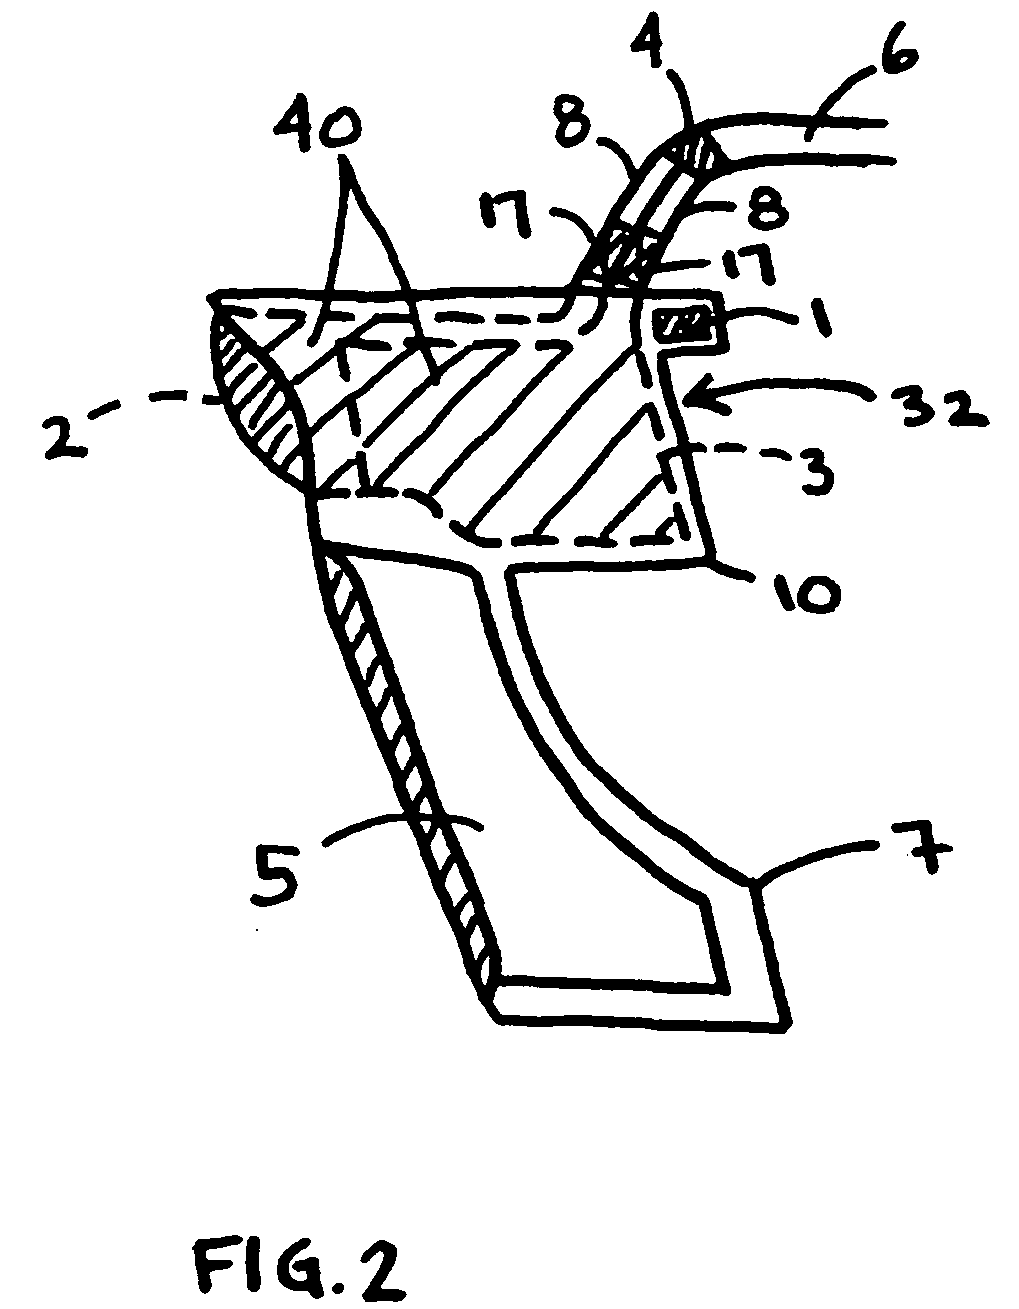 Apparatus for prevention and treatment of decubitus ulcers